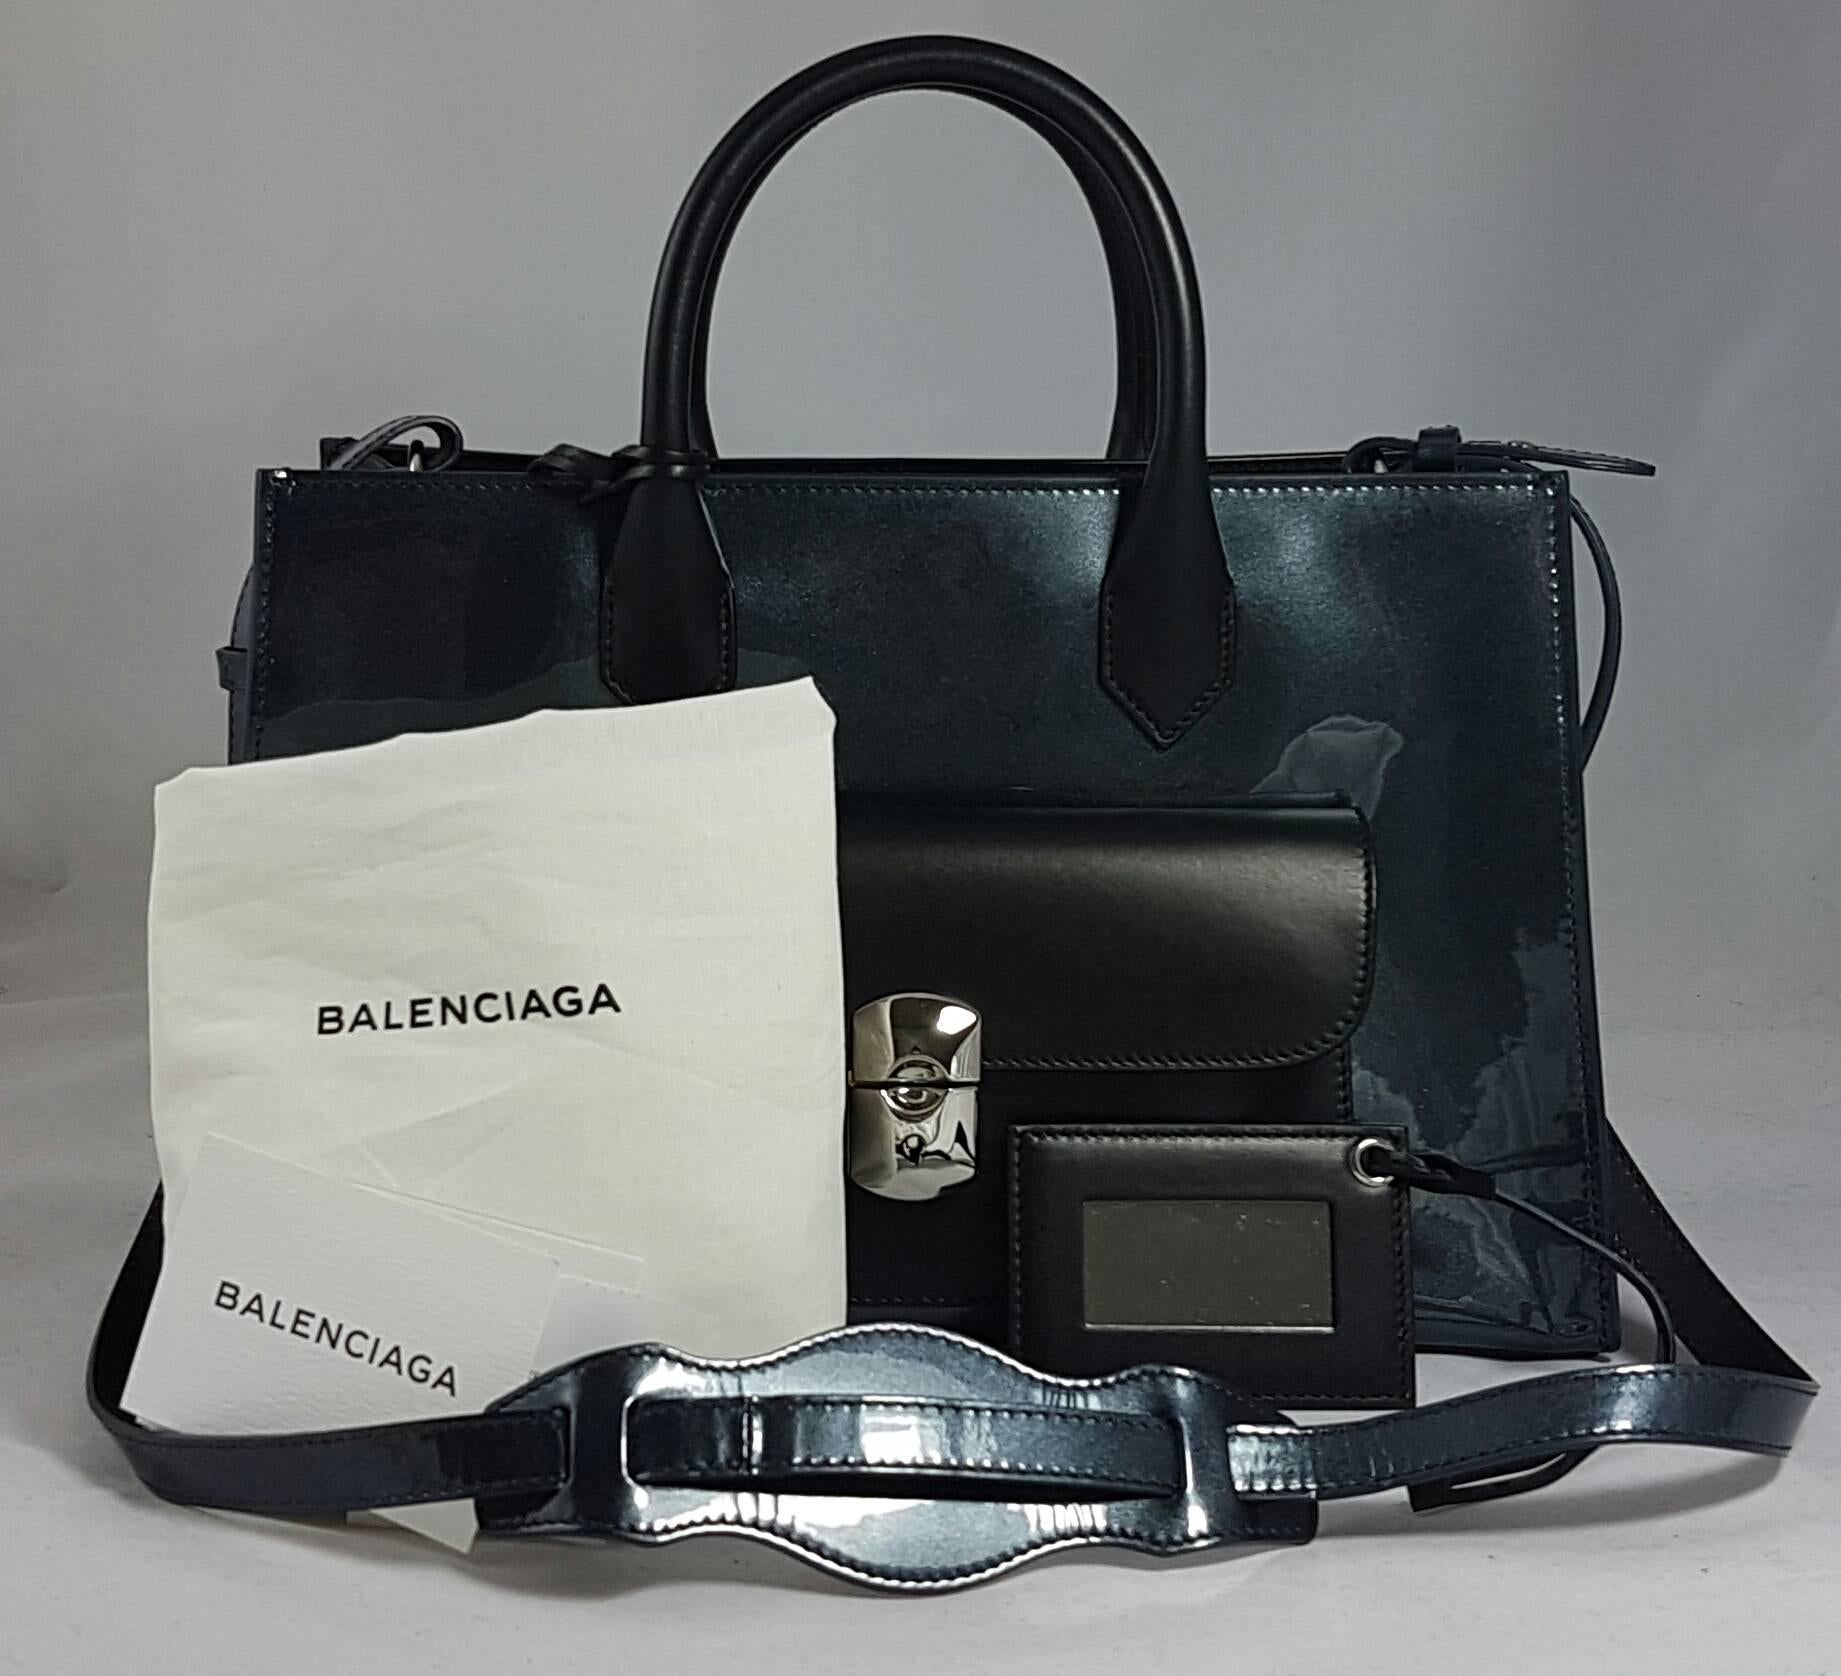 Balenciaga Padlock Work S Bag, Black

Material: Patent Leather
Black calfskin with golden hardware.
Tote handles; padded shoulder strap with 21